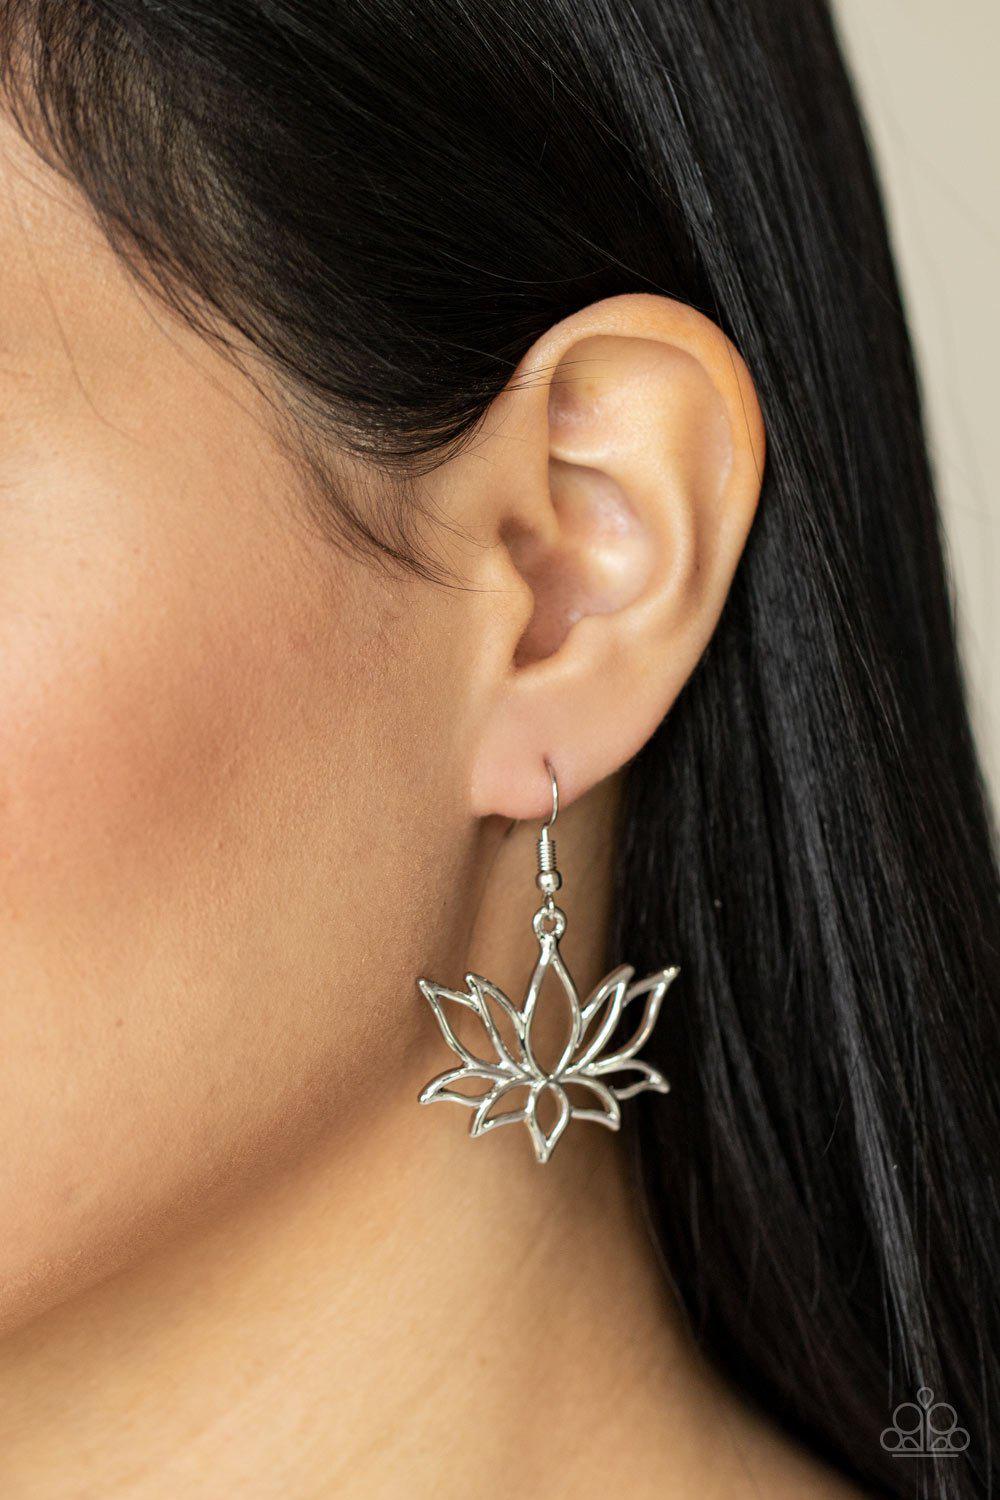 Lotus Ponds Silver Flower Earrings - Paparazzi Accessories - lightbox -CarasShop.com - $5 Jewelry by Cara Jewels